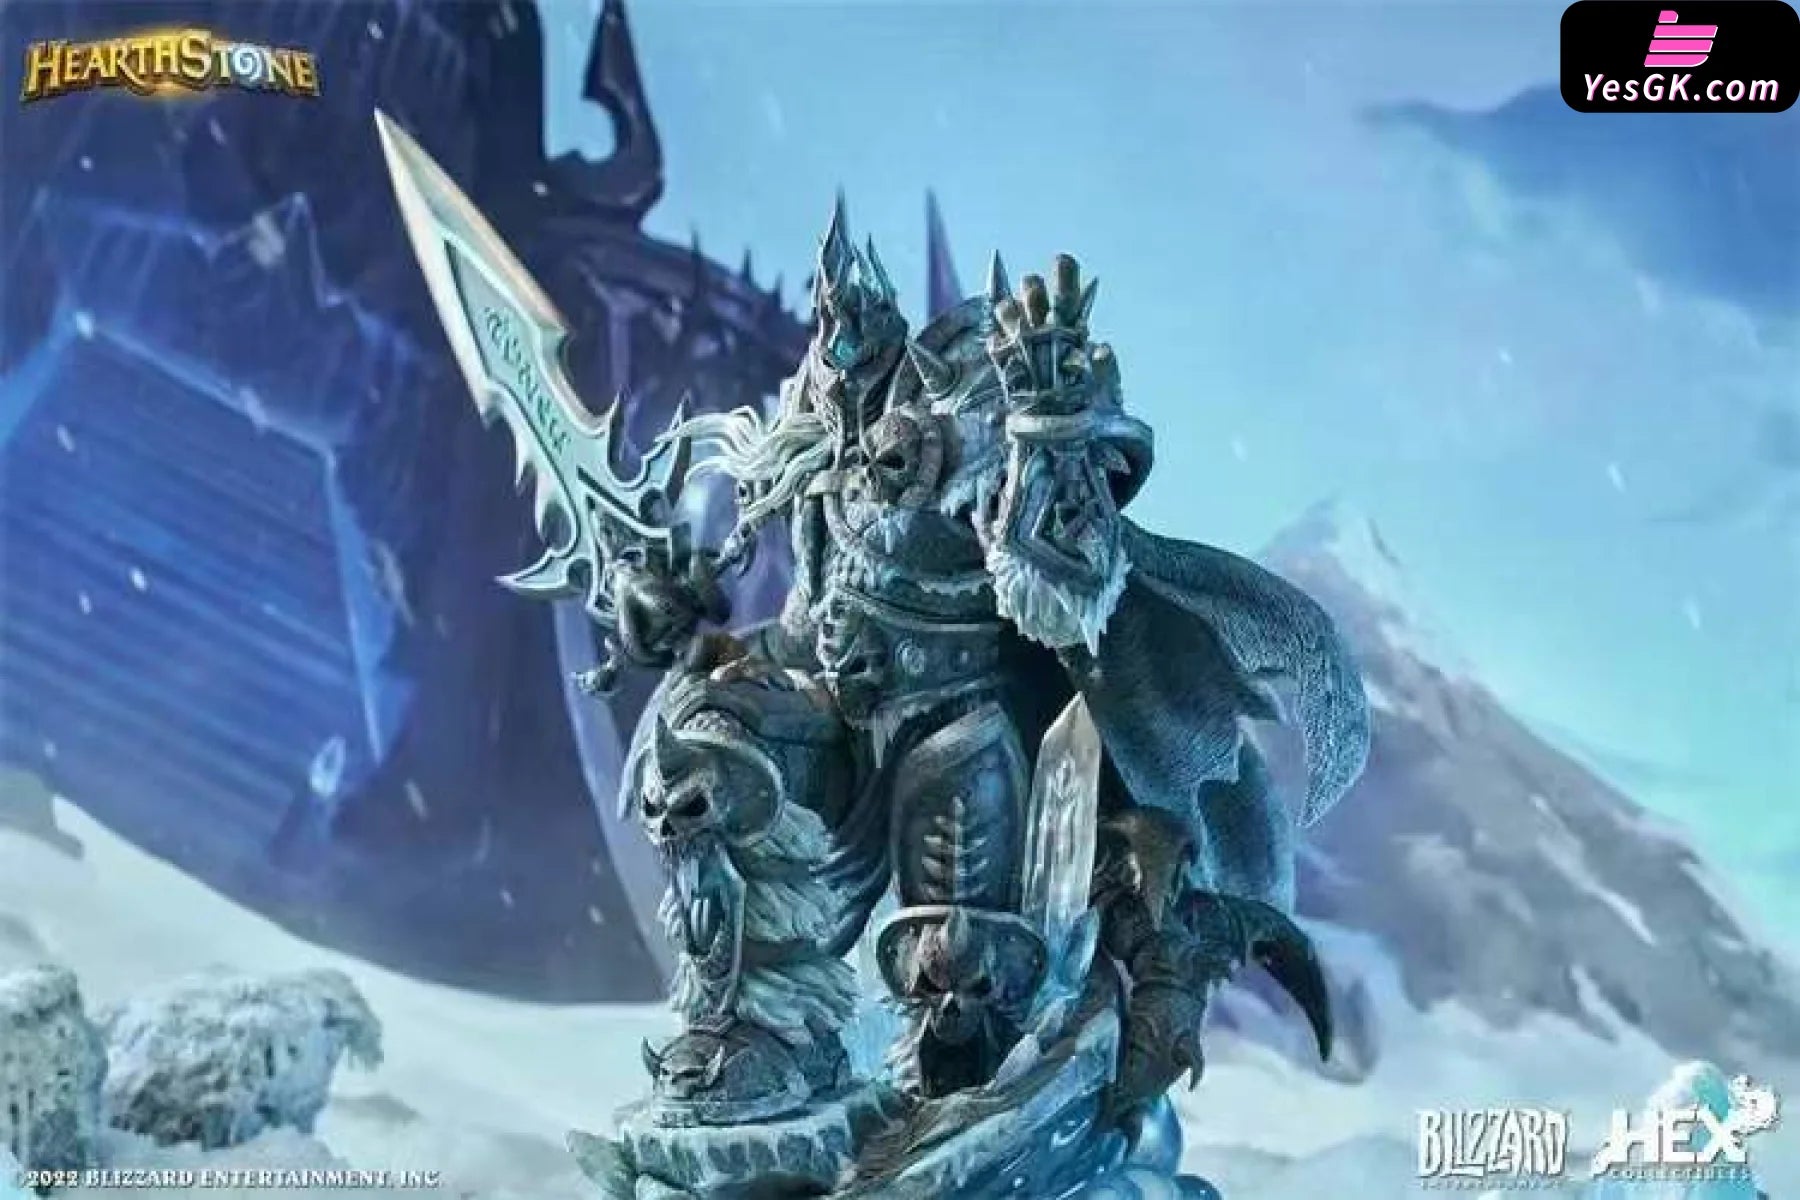 Hearthstone Genuine Authorized Lich King Resin Statue - Hex Collectibles Studio [Pre-Order]